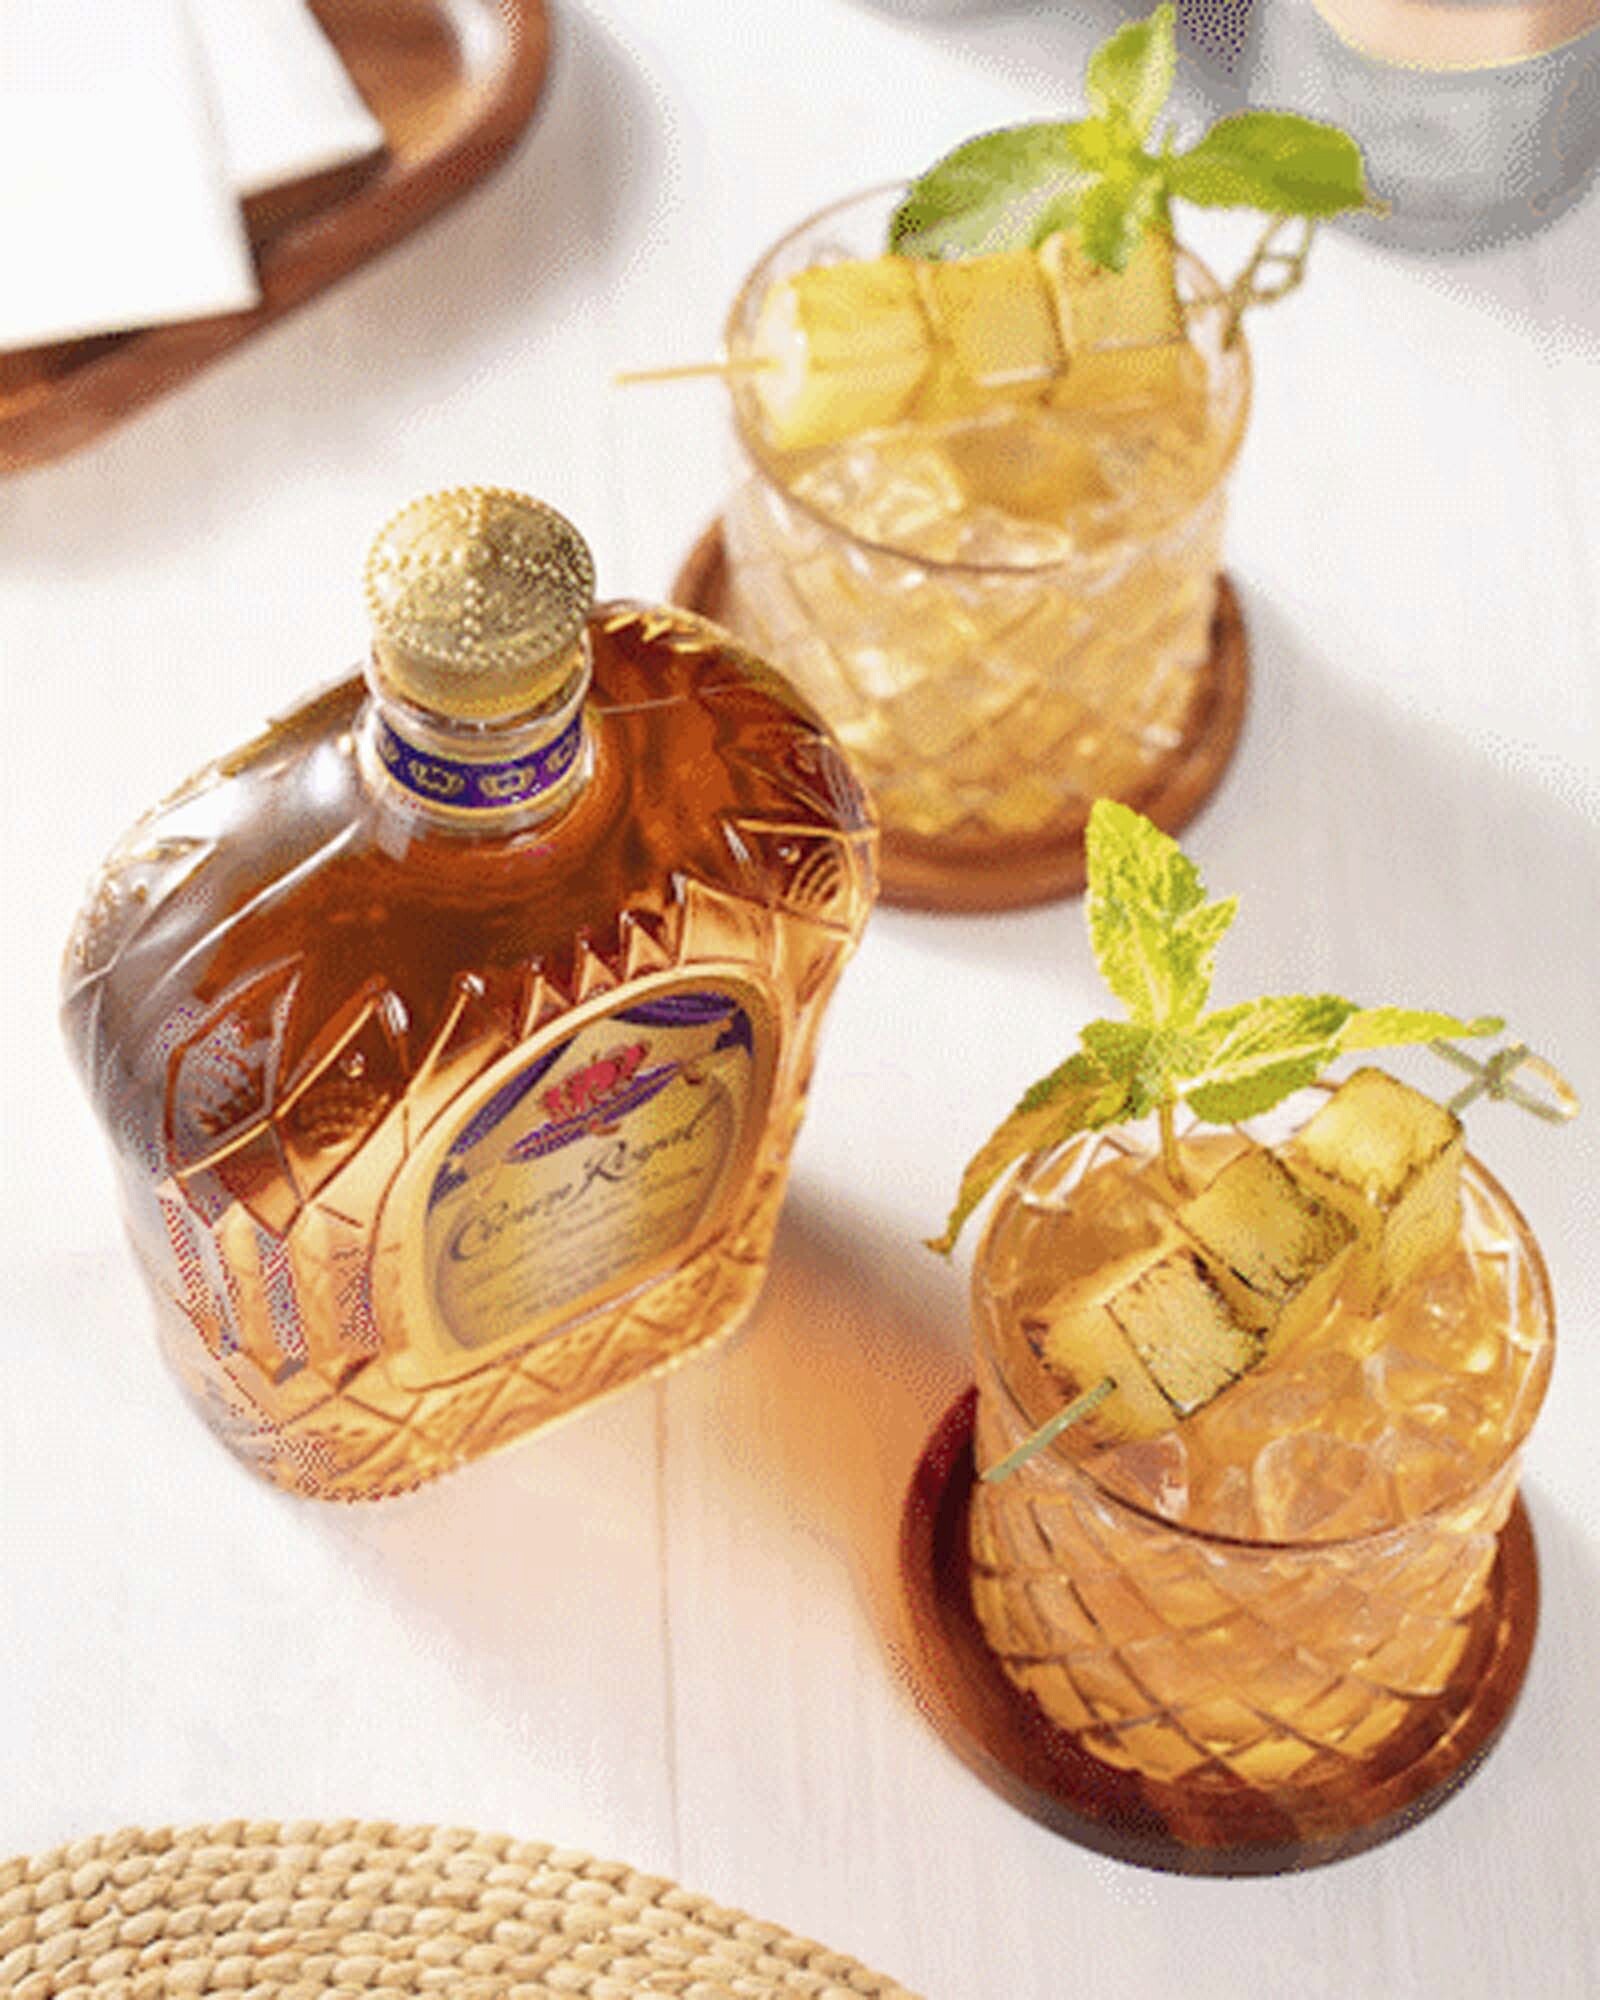 Crown Royal Pineapple Old Fashioned Whisky Cocktail